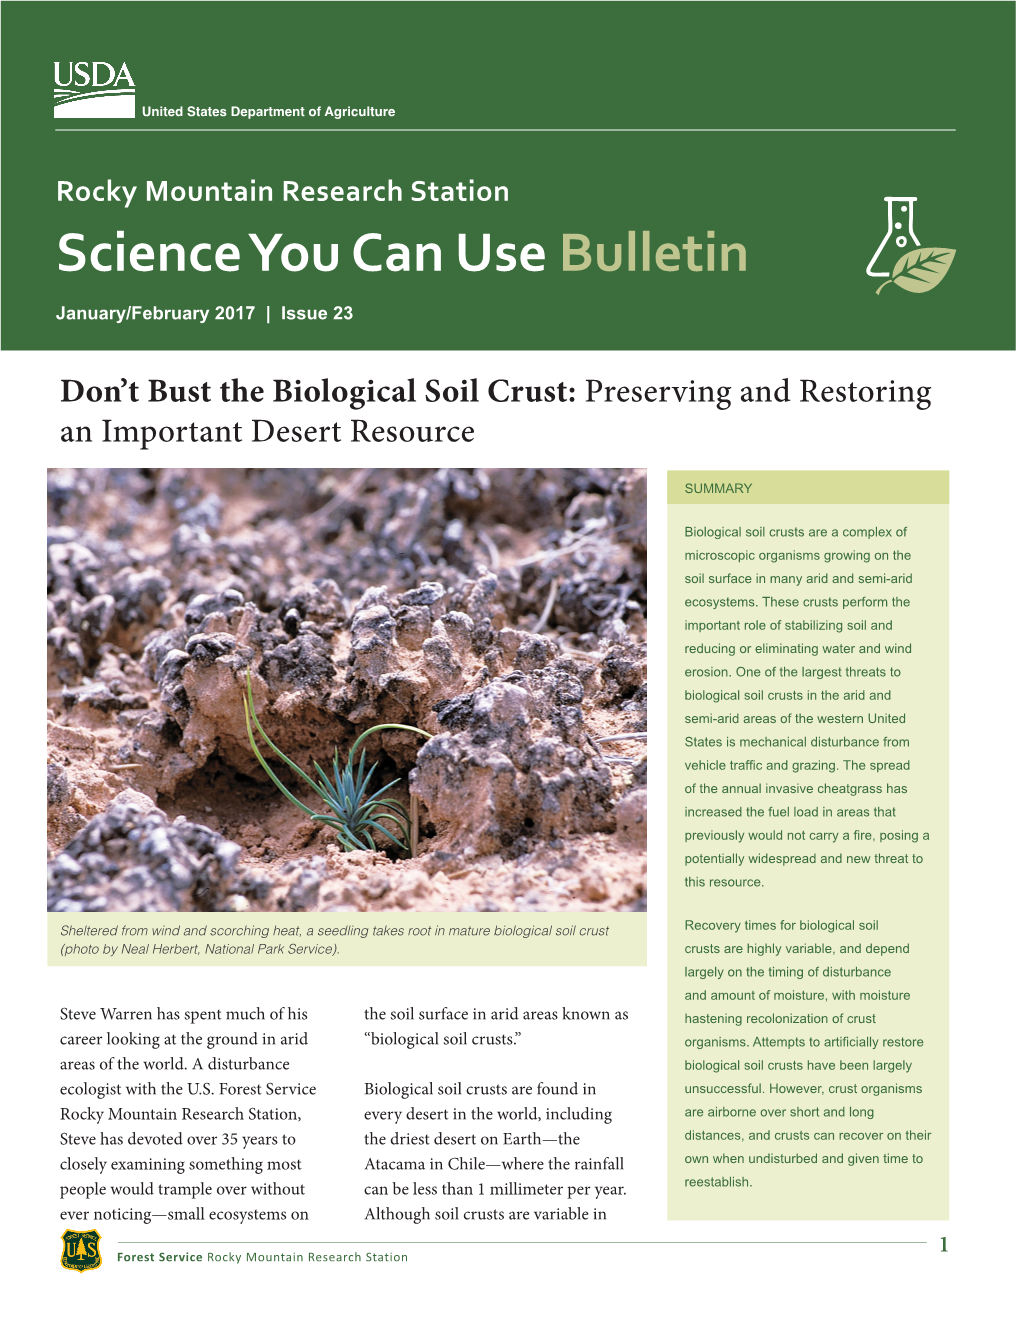 Don't Bust the Biological Soil Crust: Preserving and Restoring an Important Desert Resource